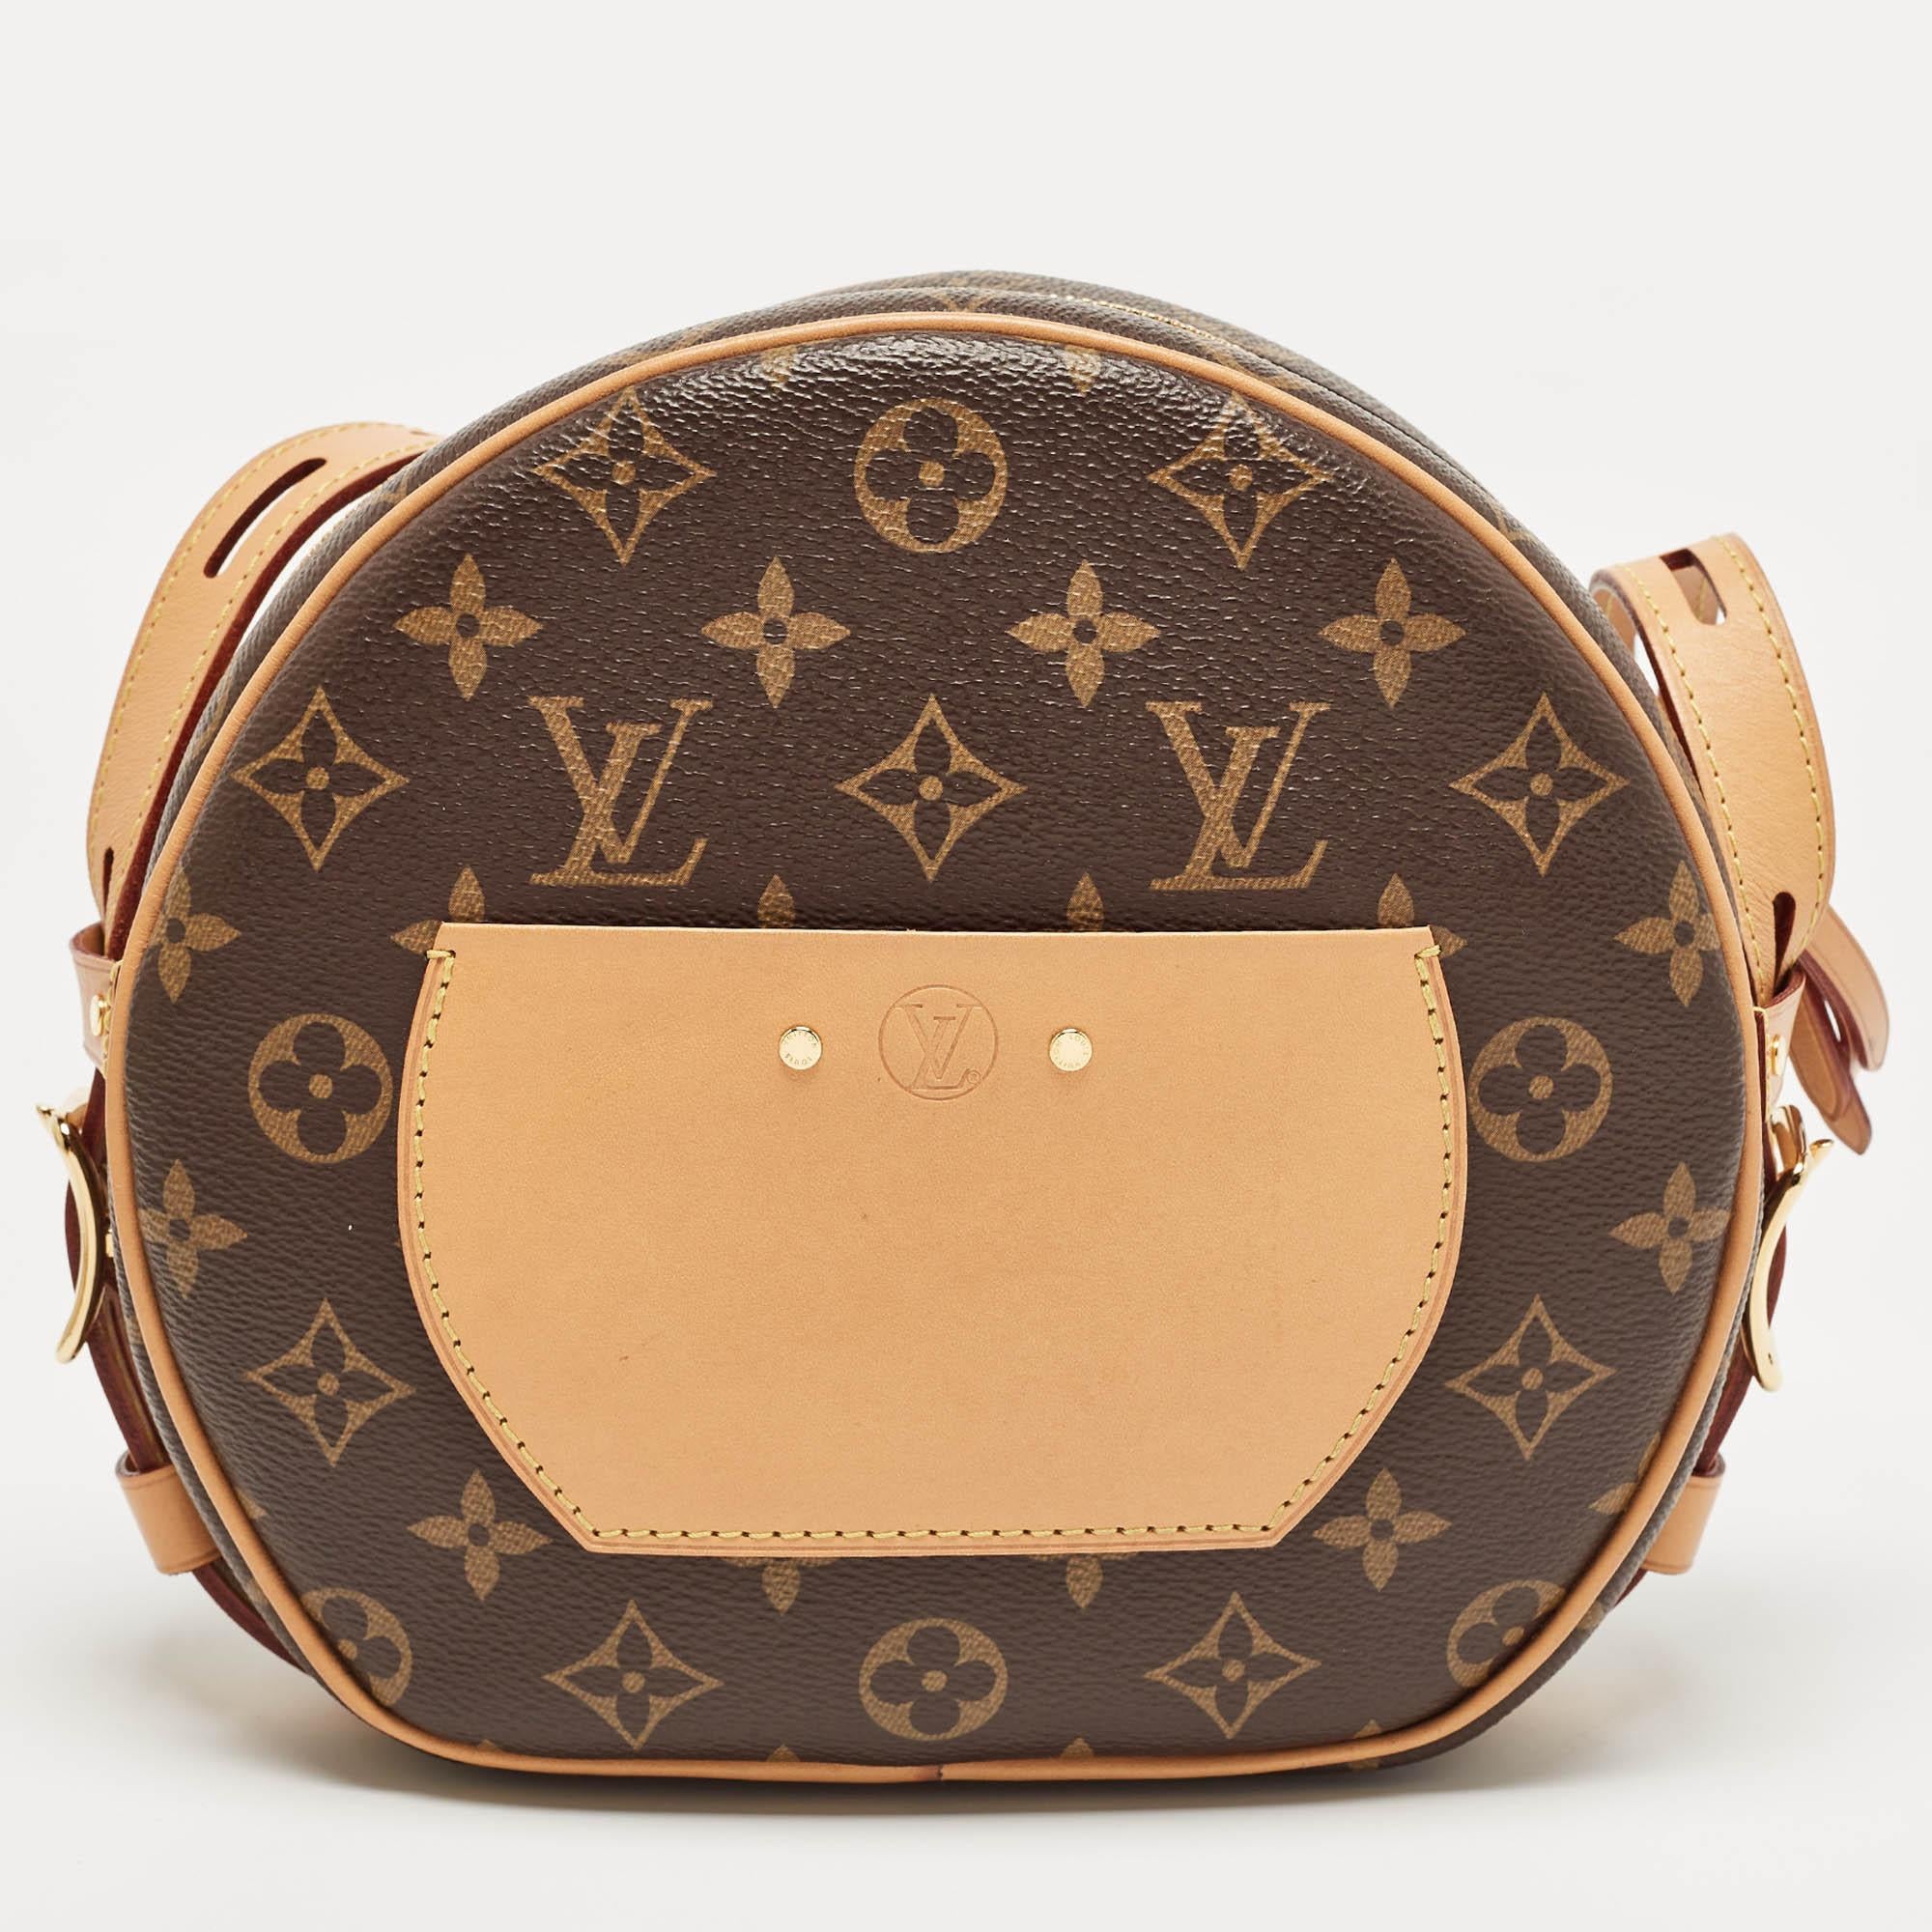 First seen on the Cruise 2018 runway show, Nicolas Ghesquière designed the Boite Chapeau Souple bag as a reimagined version of one of the brand's famous travel bags, the Hatbox. Here, we have the one in monogram canvas and leather, holding the